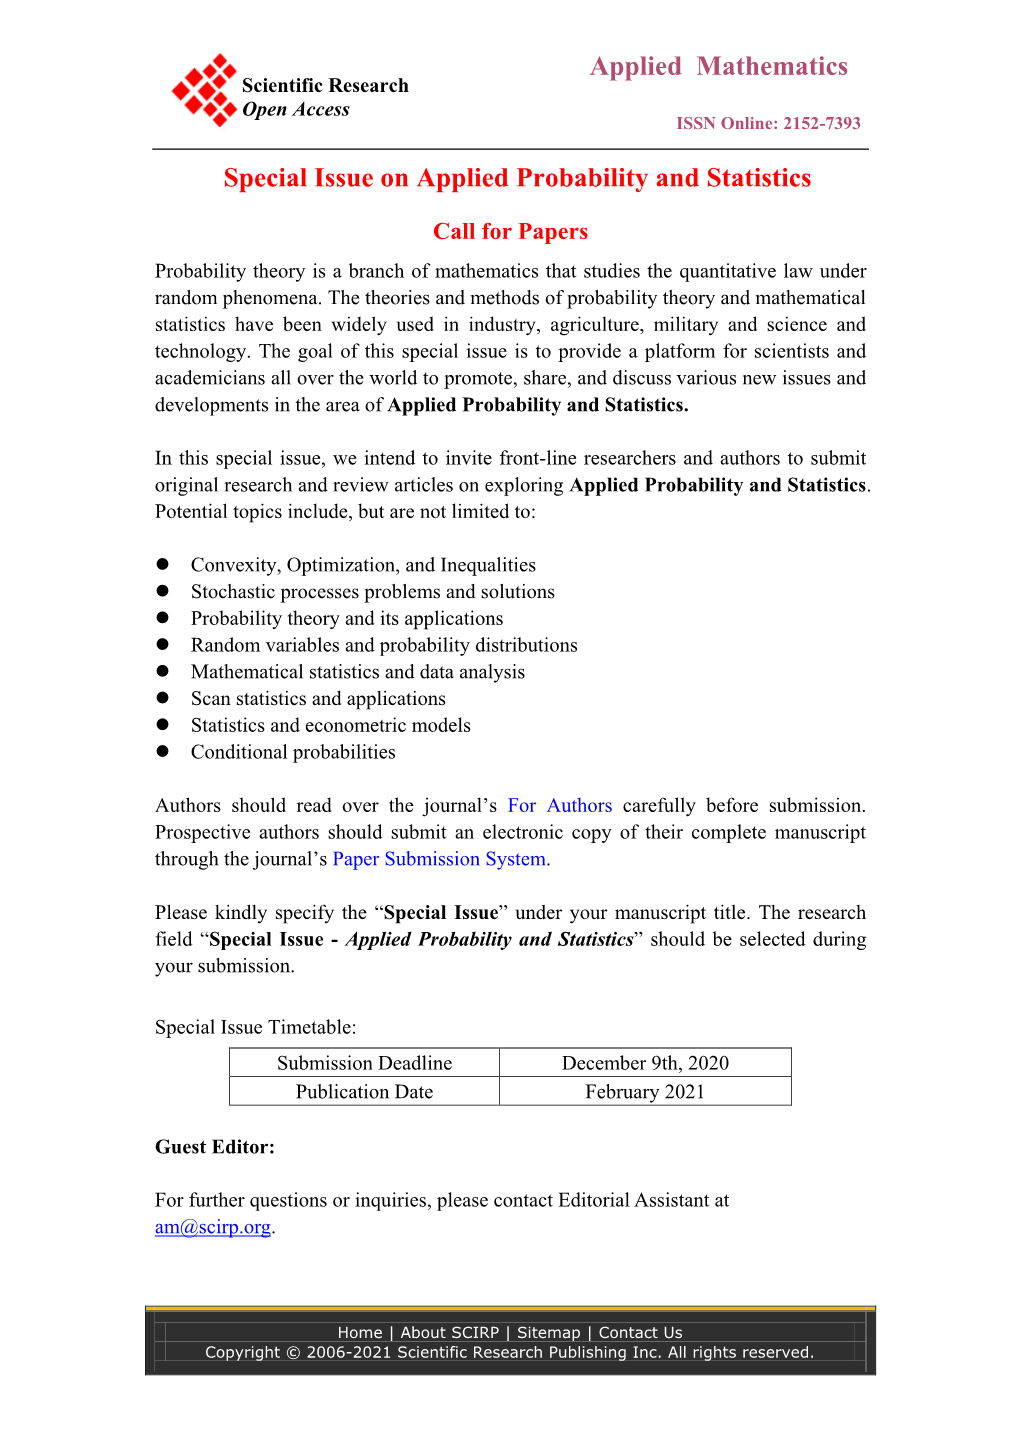 Applied Mathematics Special Issue on Applied Probability and Statistics